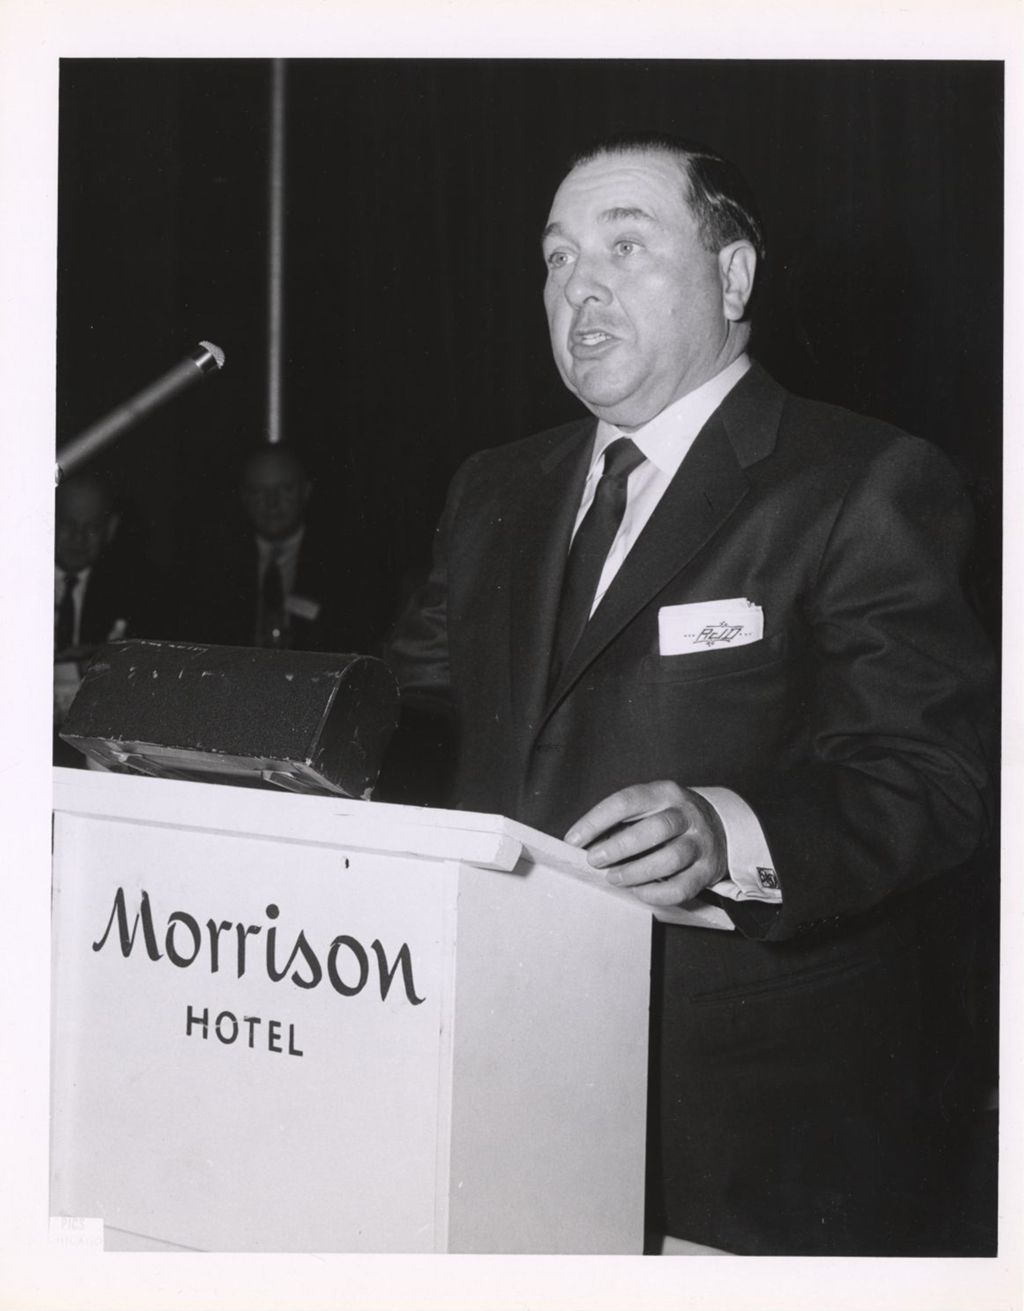 Miniature of Richard J. Daley speaking at the Morrison Hotel